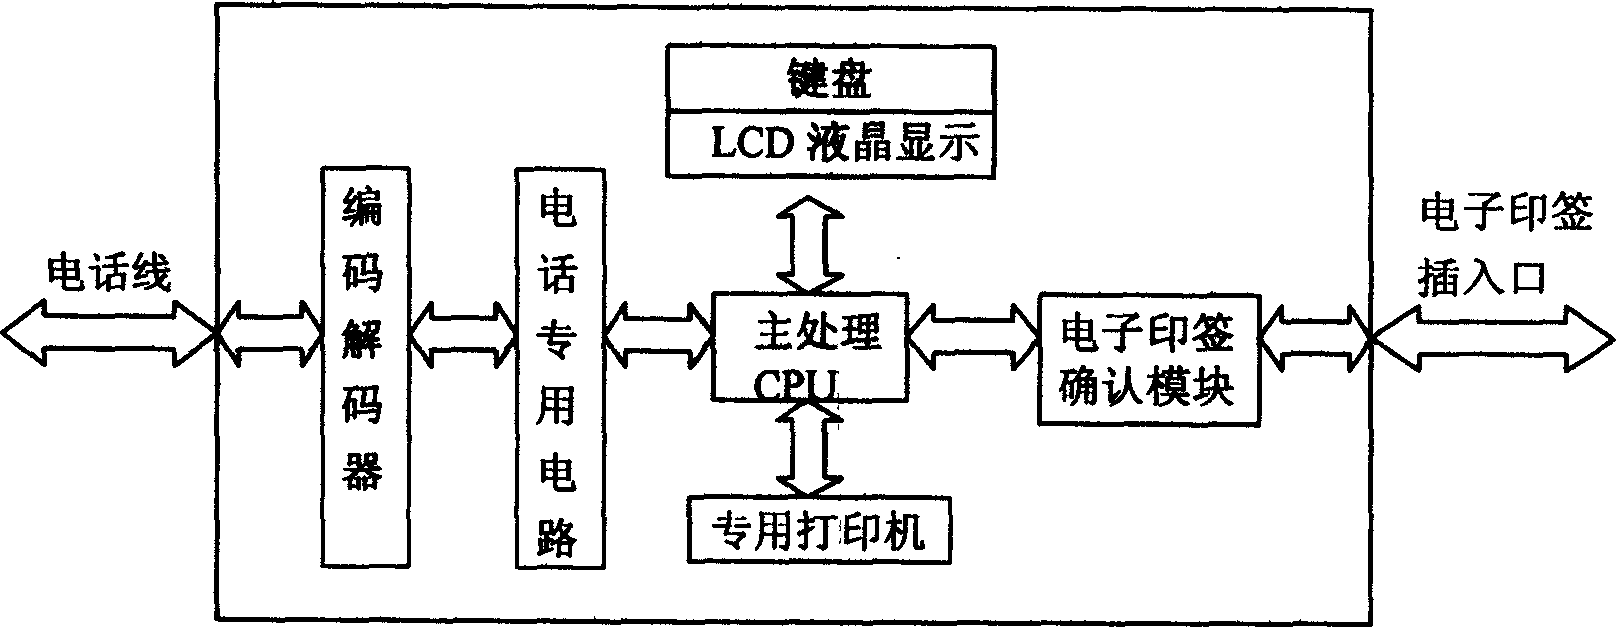 Wired self-service banking user terminal system